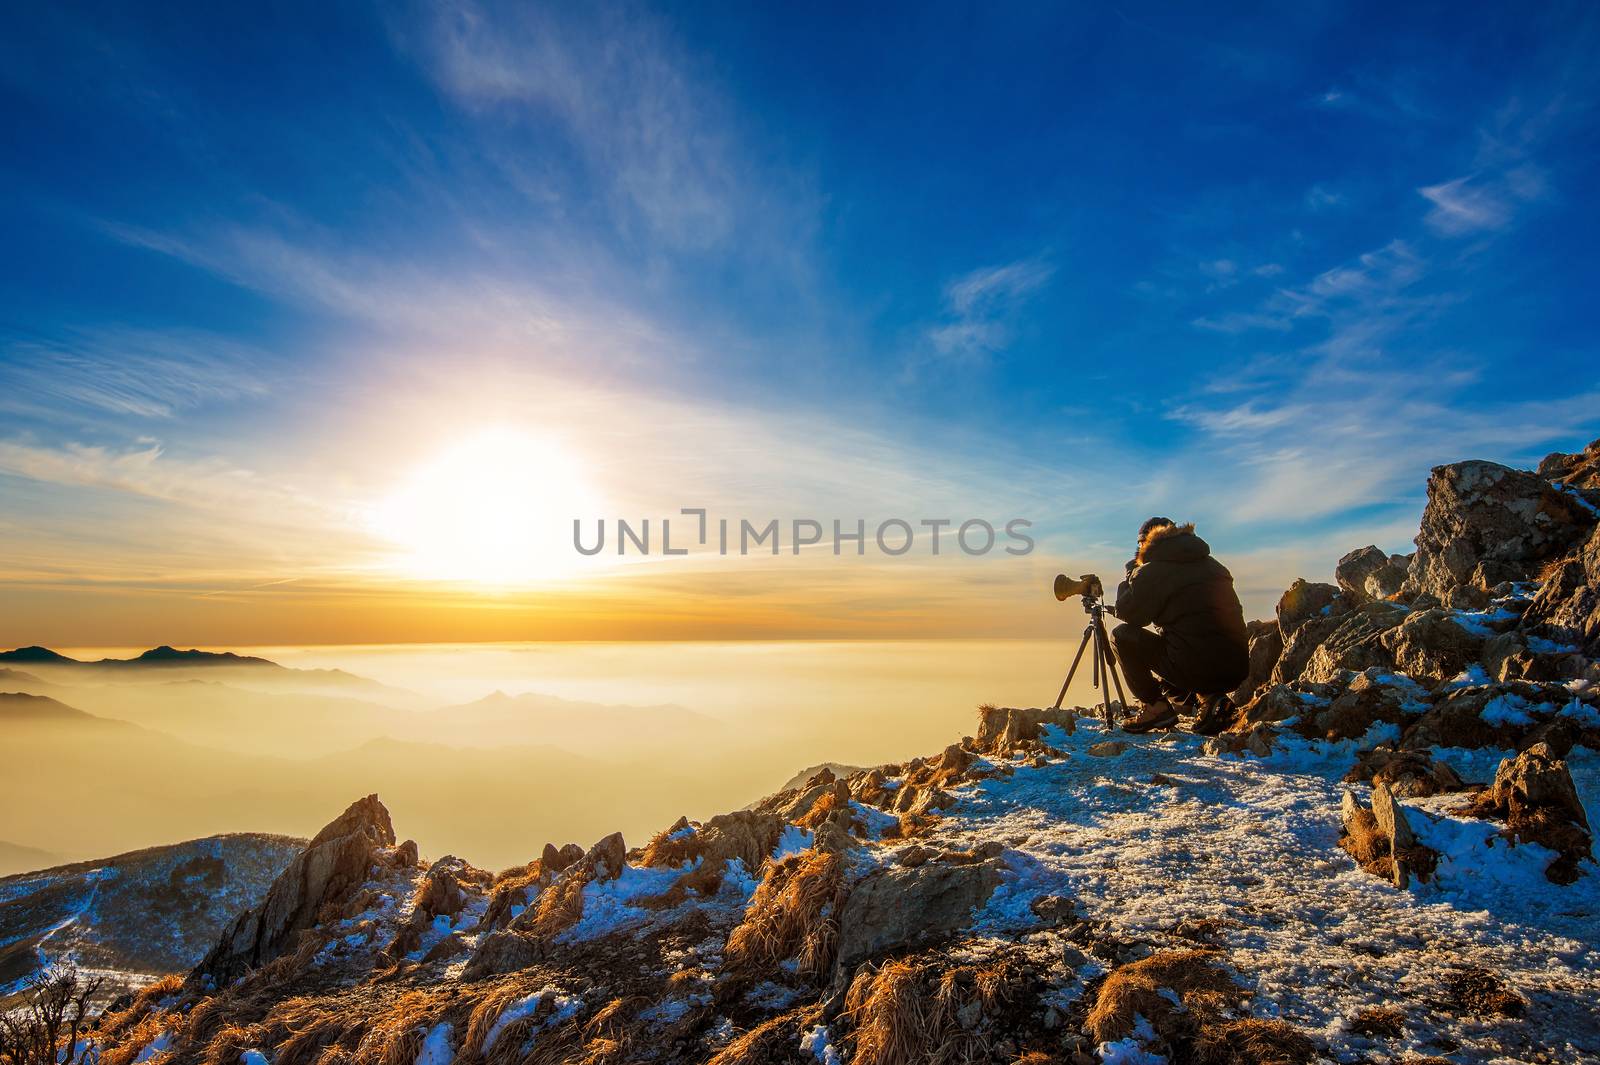 Professional photographer takes photos with camera on tripod on rocky peak at sunset.